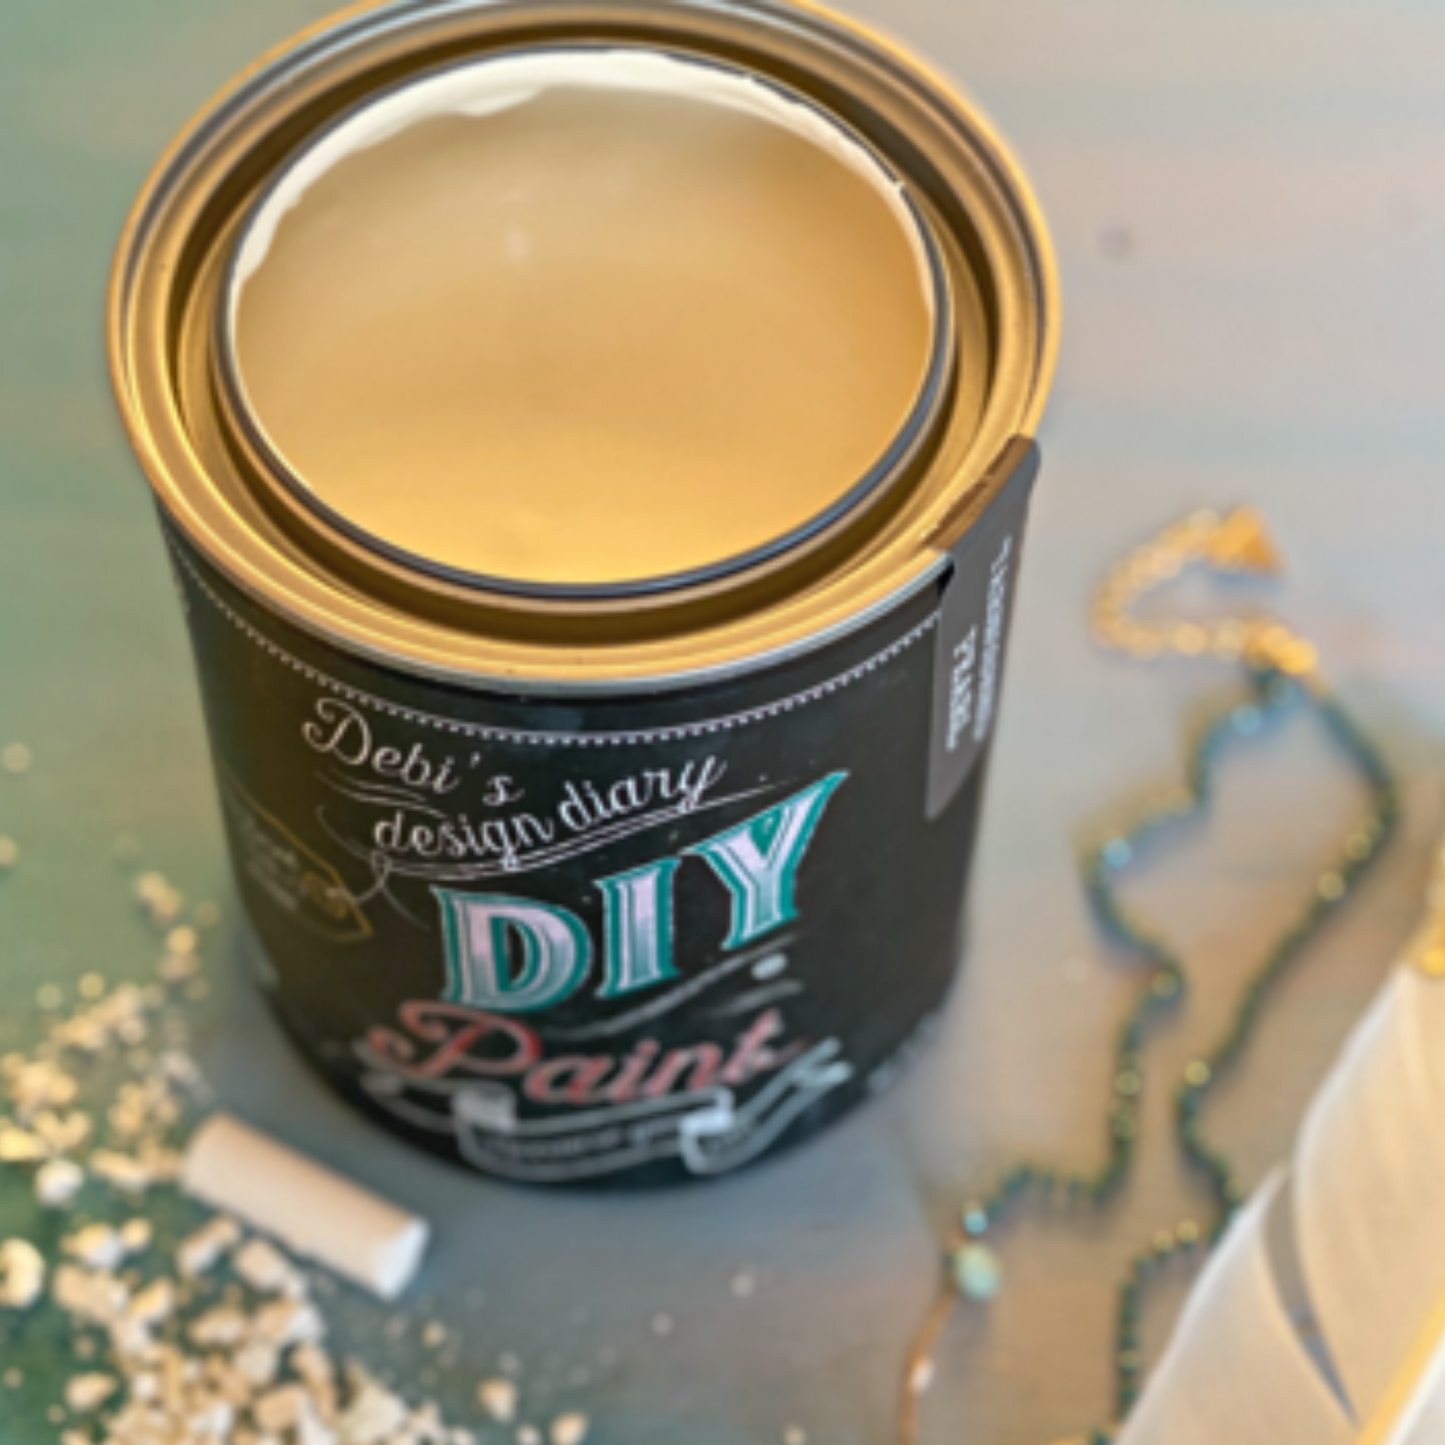 Debi's Design Diary DIY Paint in Tarnished Pearl (antique white) at Milton's Daughter